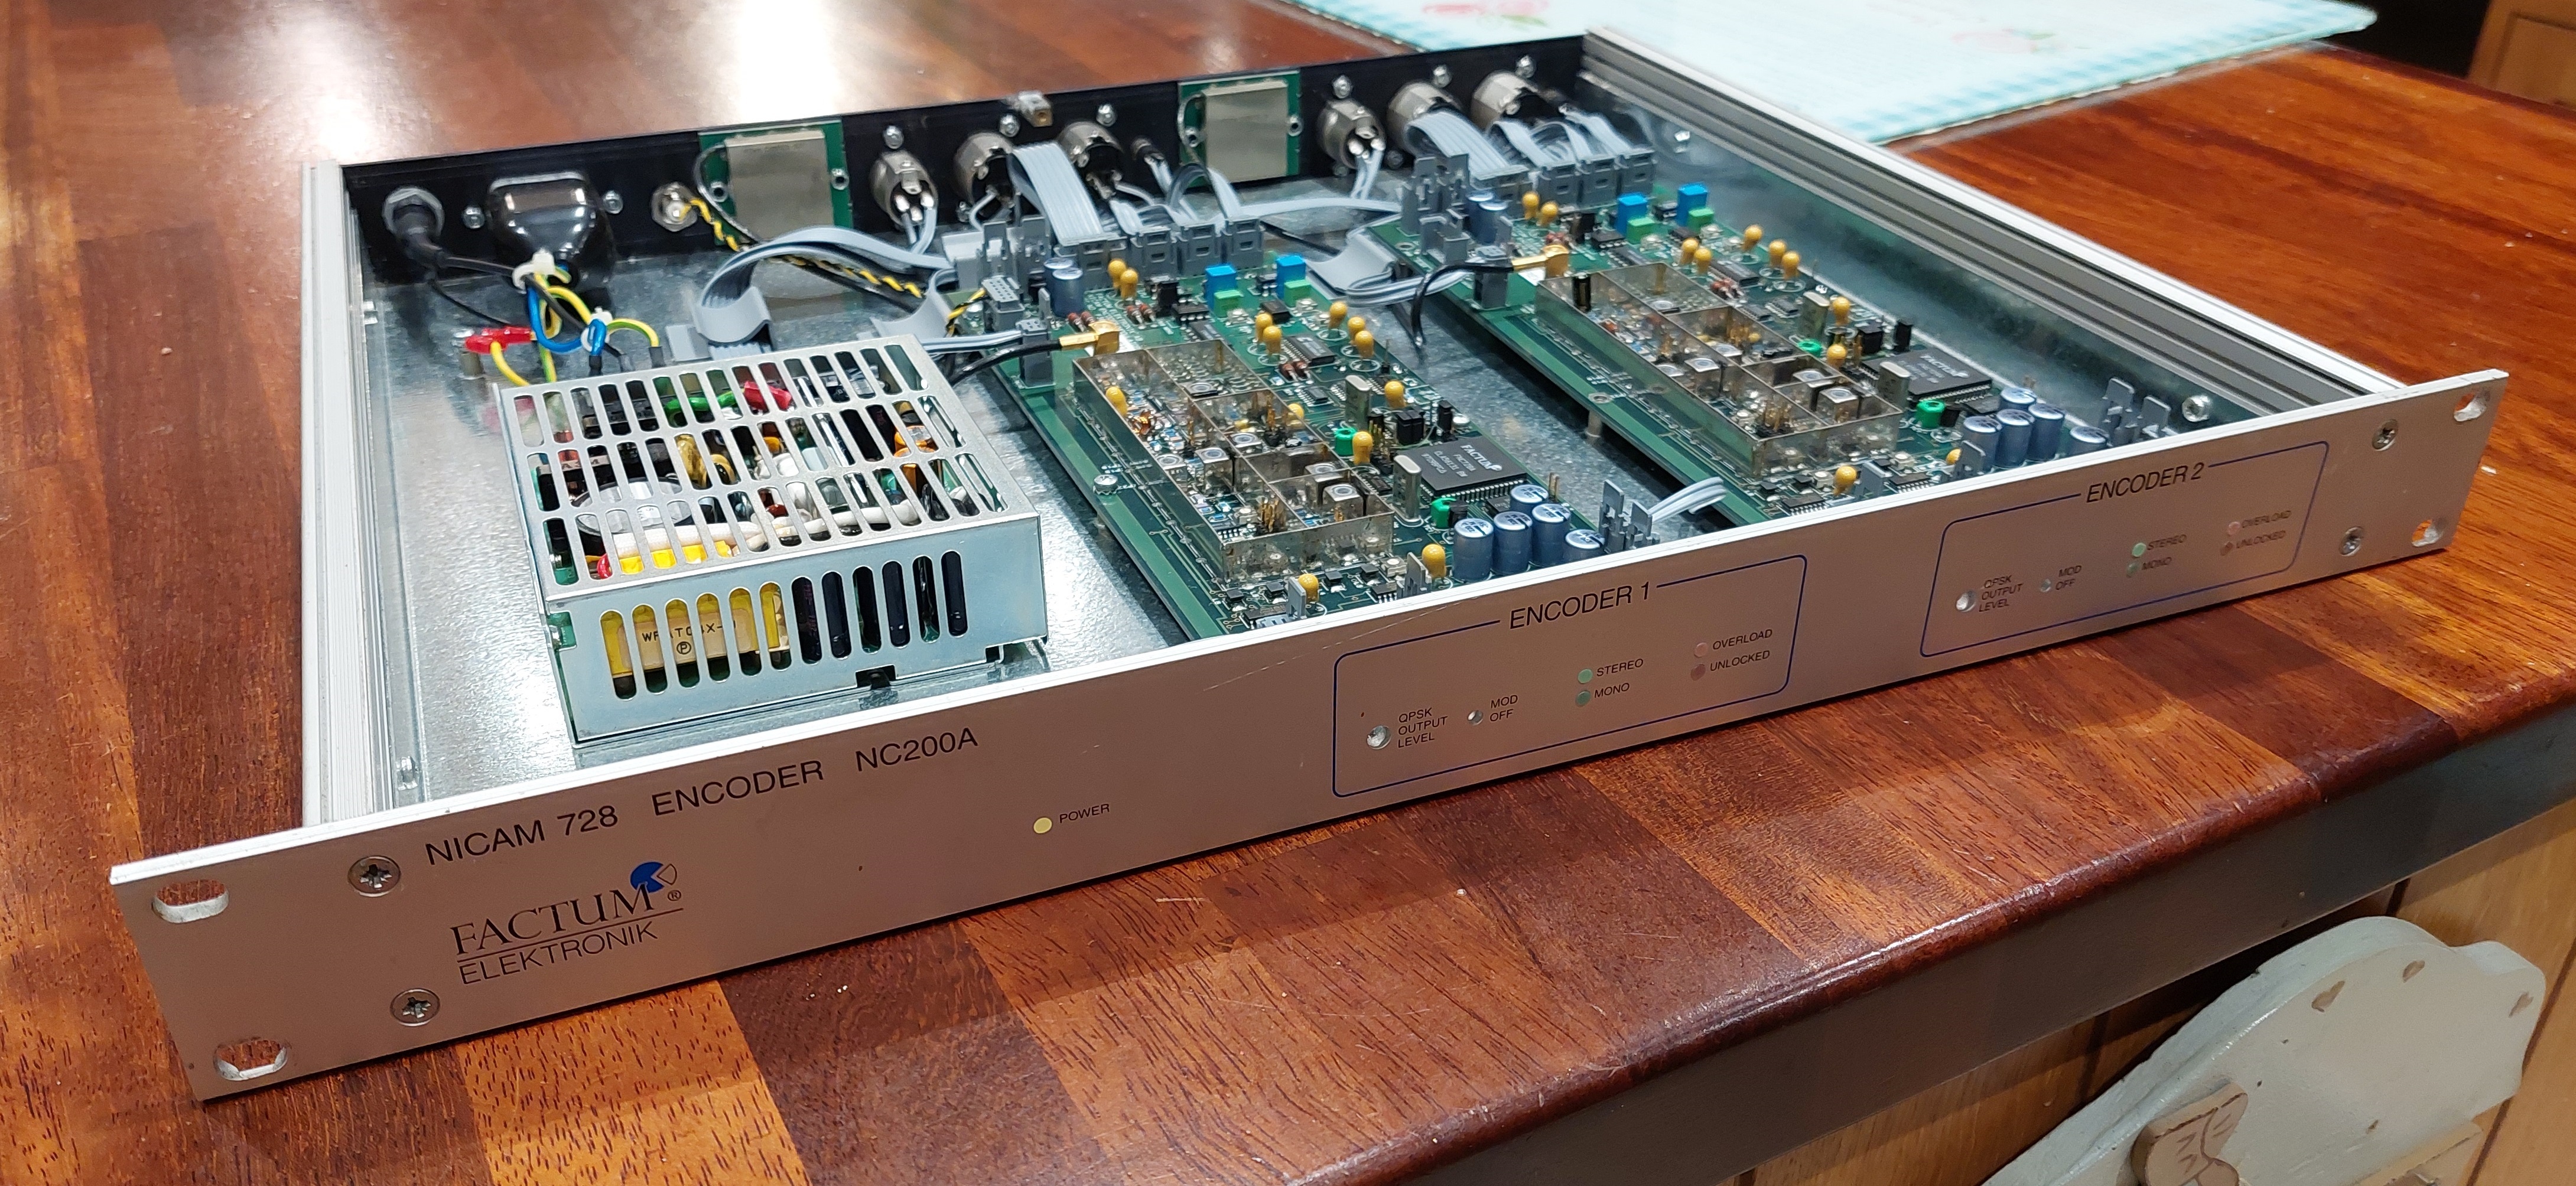 The NC200A unit. It's a 1U rack mountable design with a silver finish and screen-printed labels. Removing the cover reveals two medium sized circuit boards littered with surface mount componenets and a shielded power supply module.